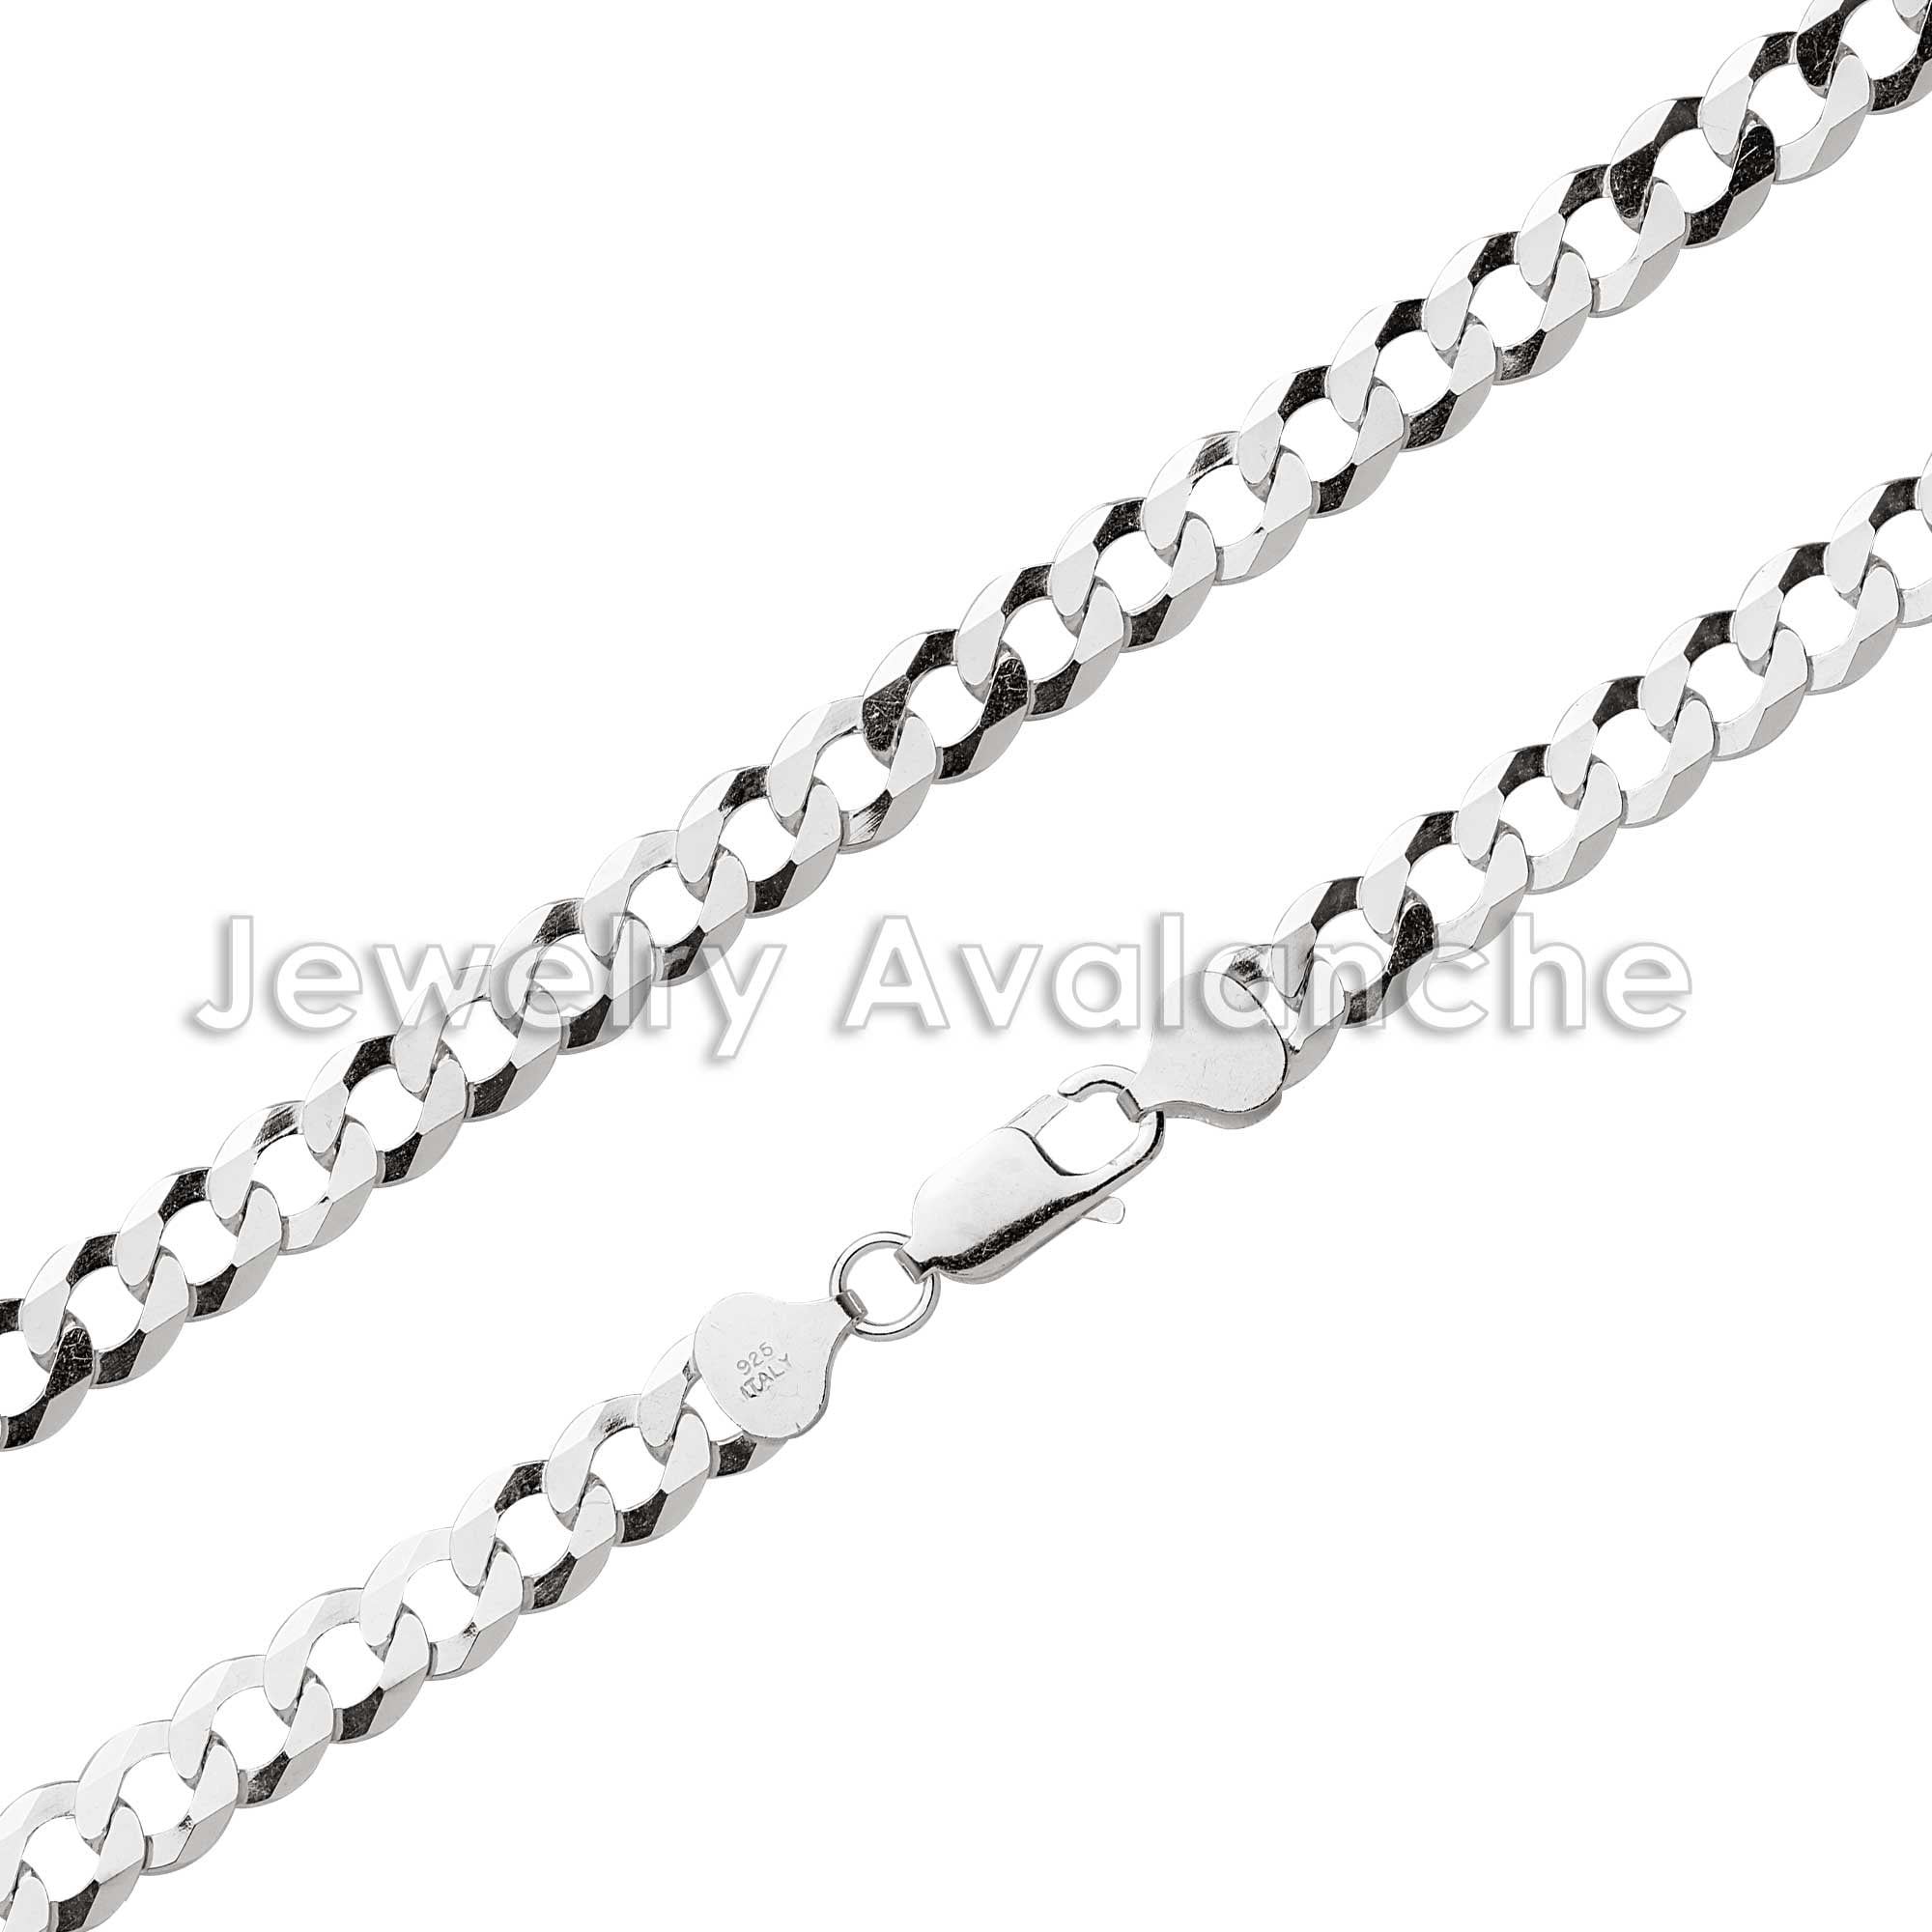 Sterling Silver Mens Flat Curb 5.2mm Chain Necklace 18 20 22 24 26 28 30" inch 